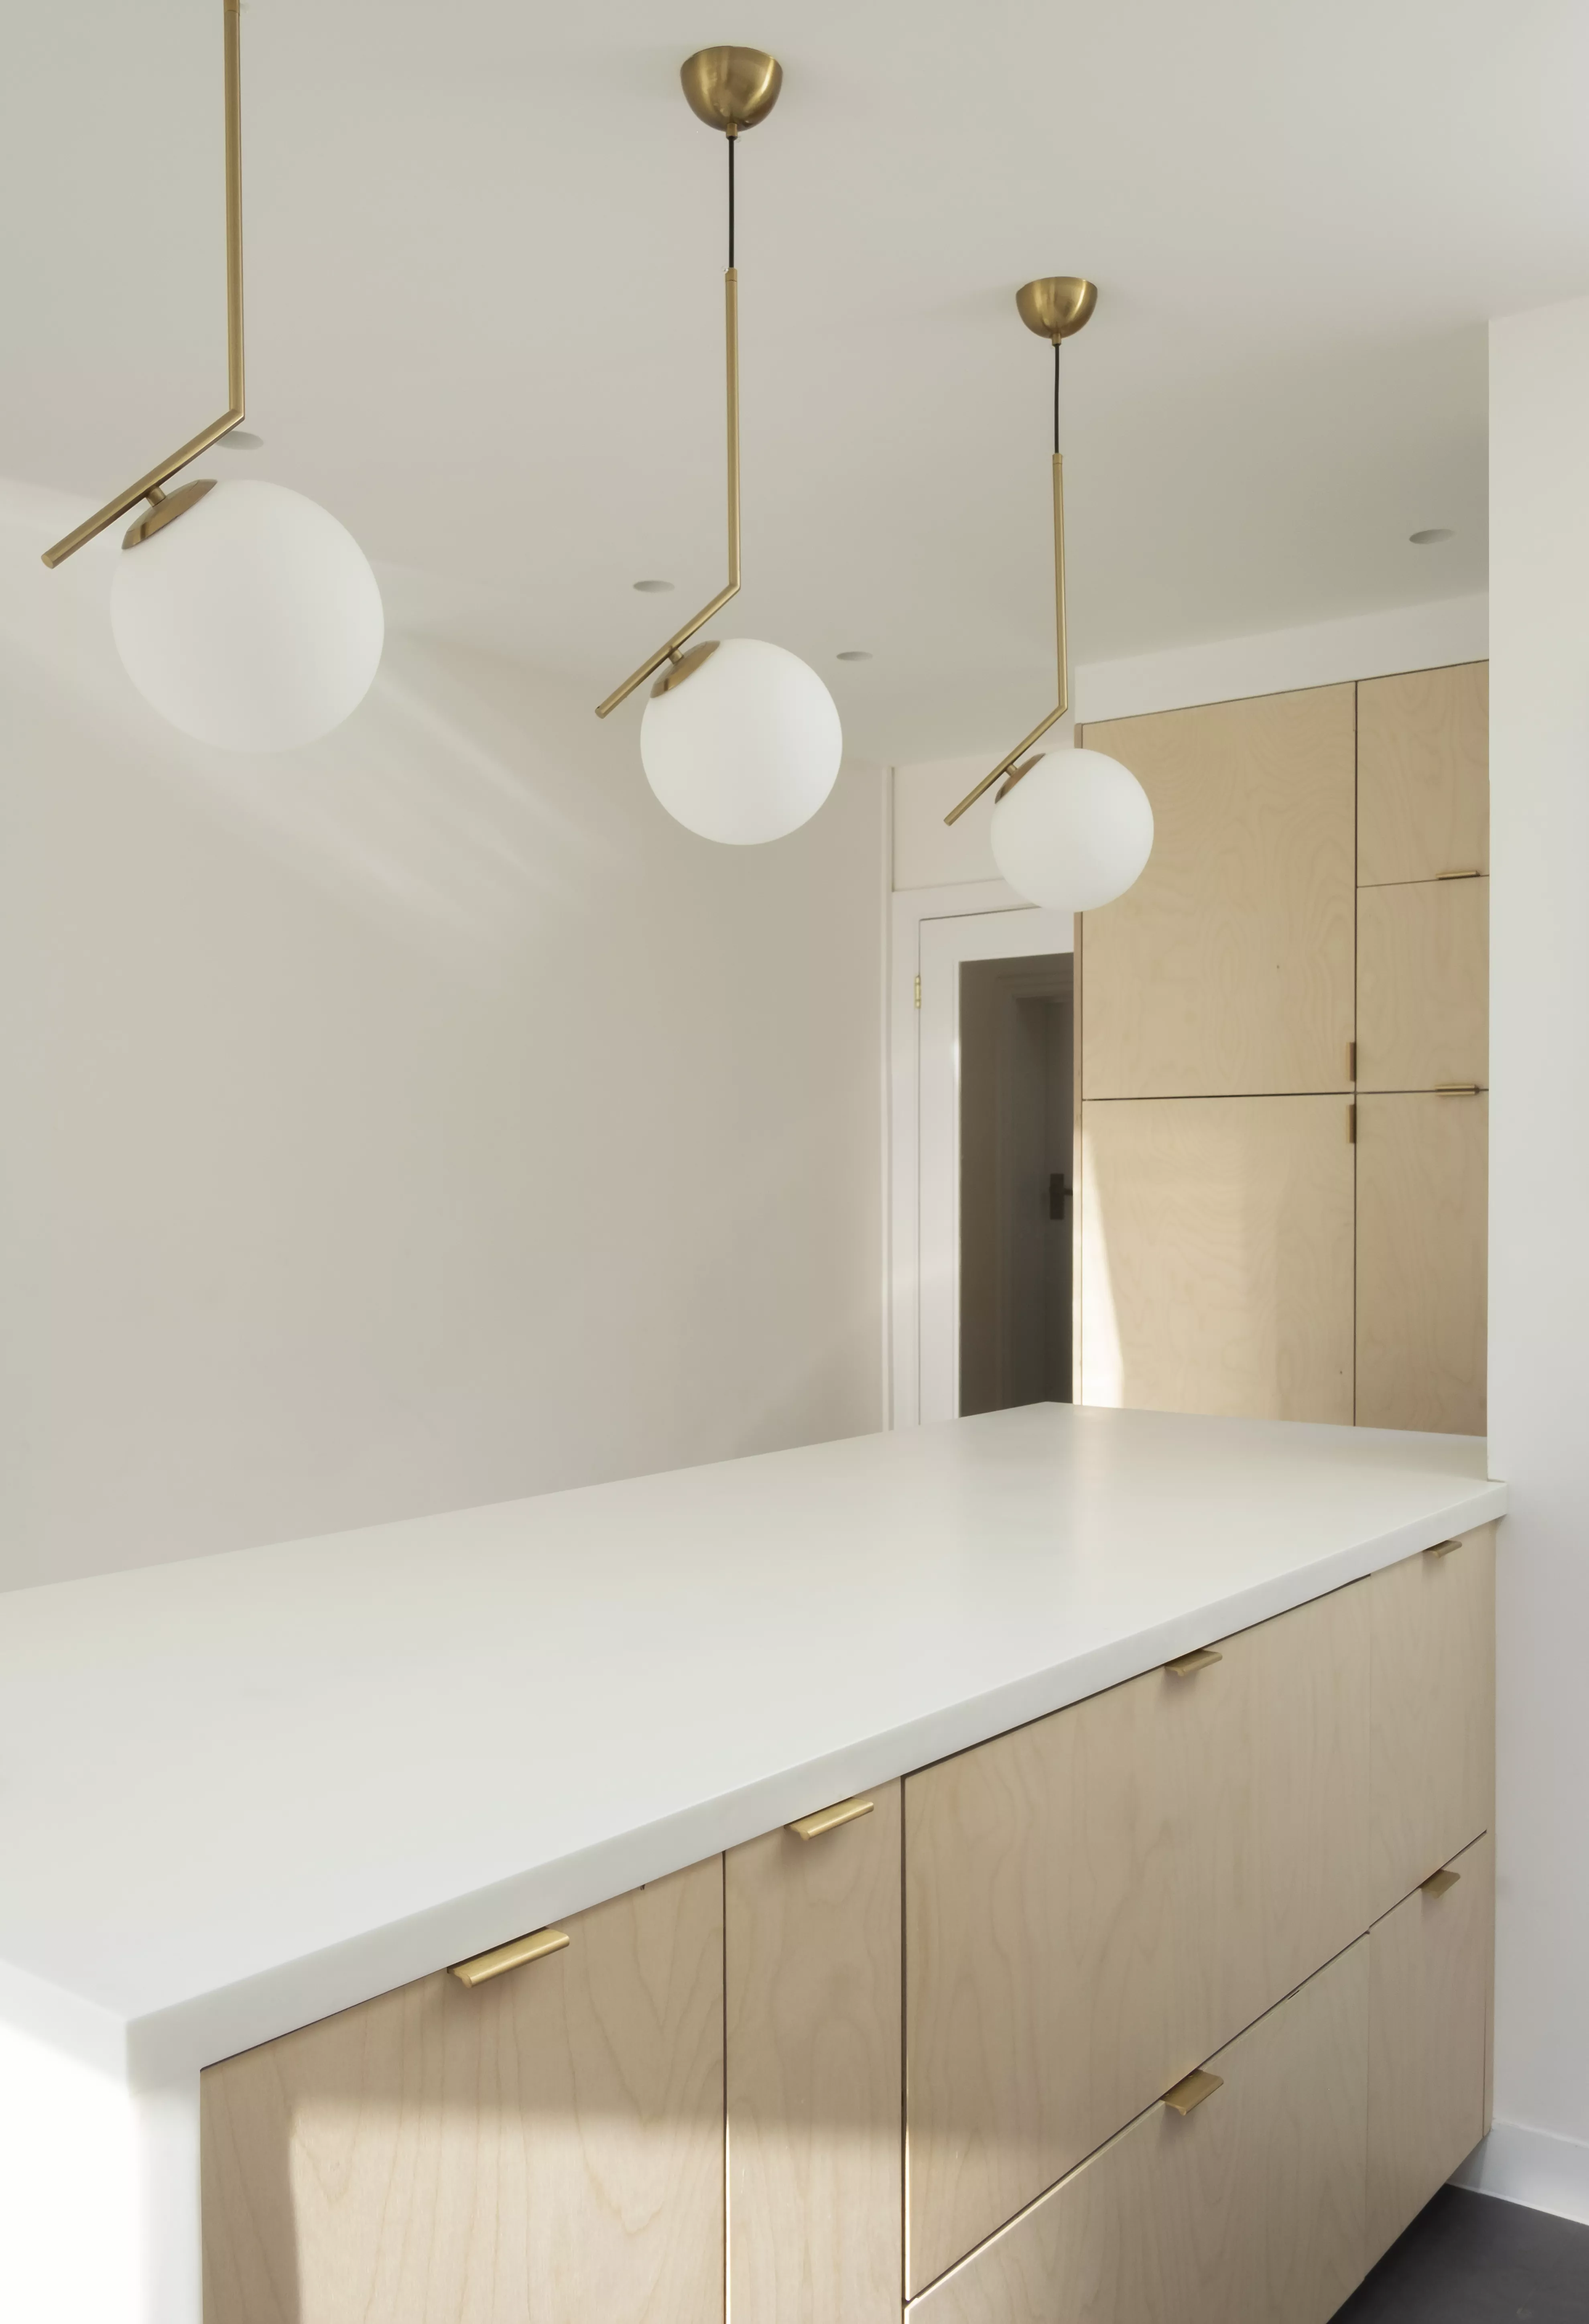 A dreamy minimalist kitchen with HIMACS elements in the Nook House